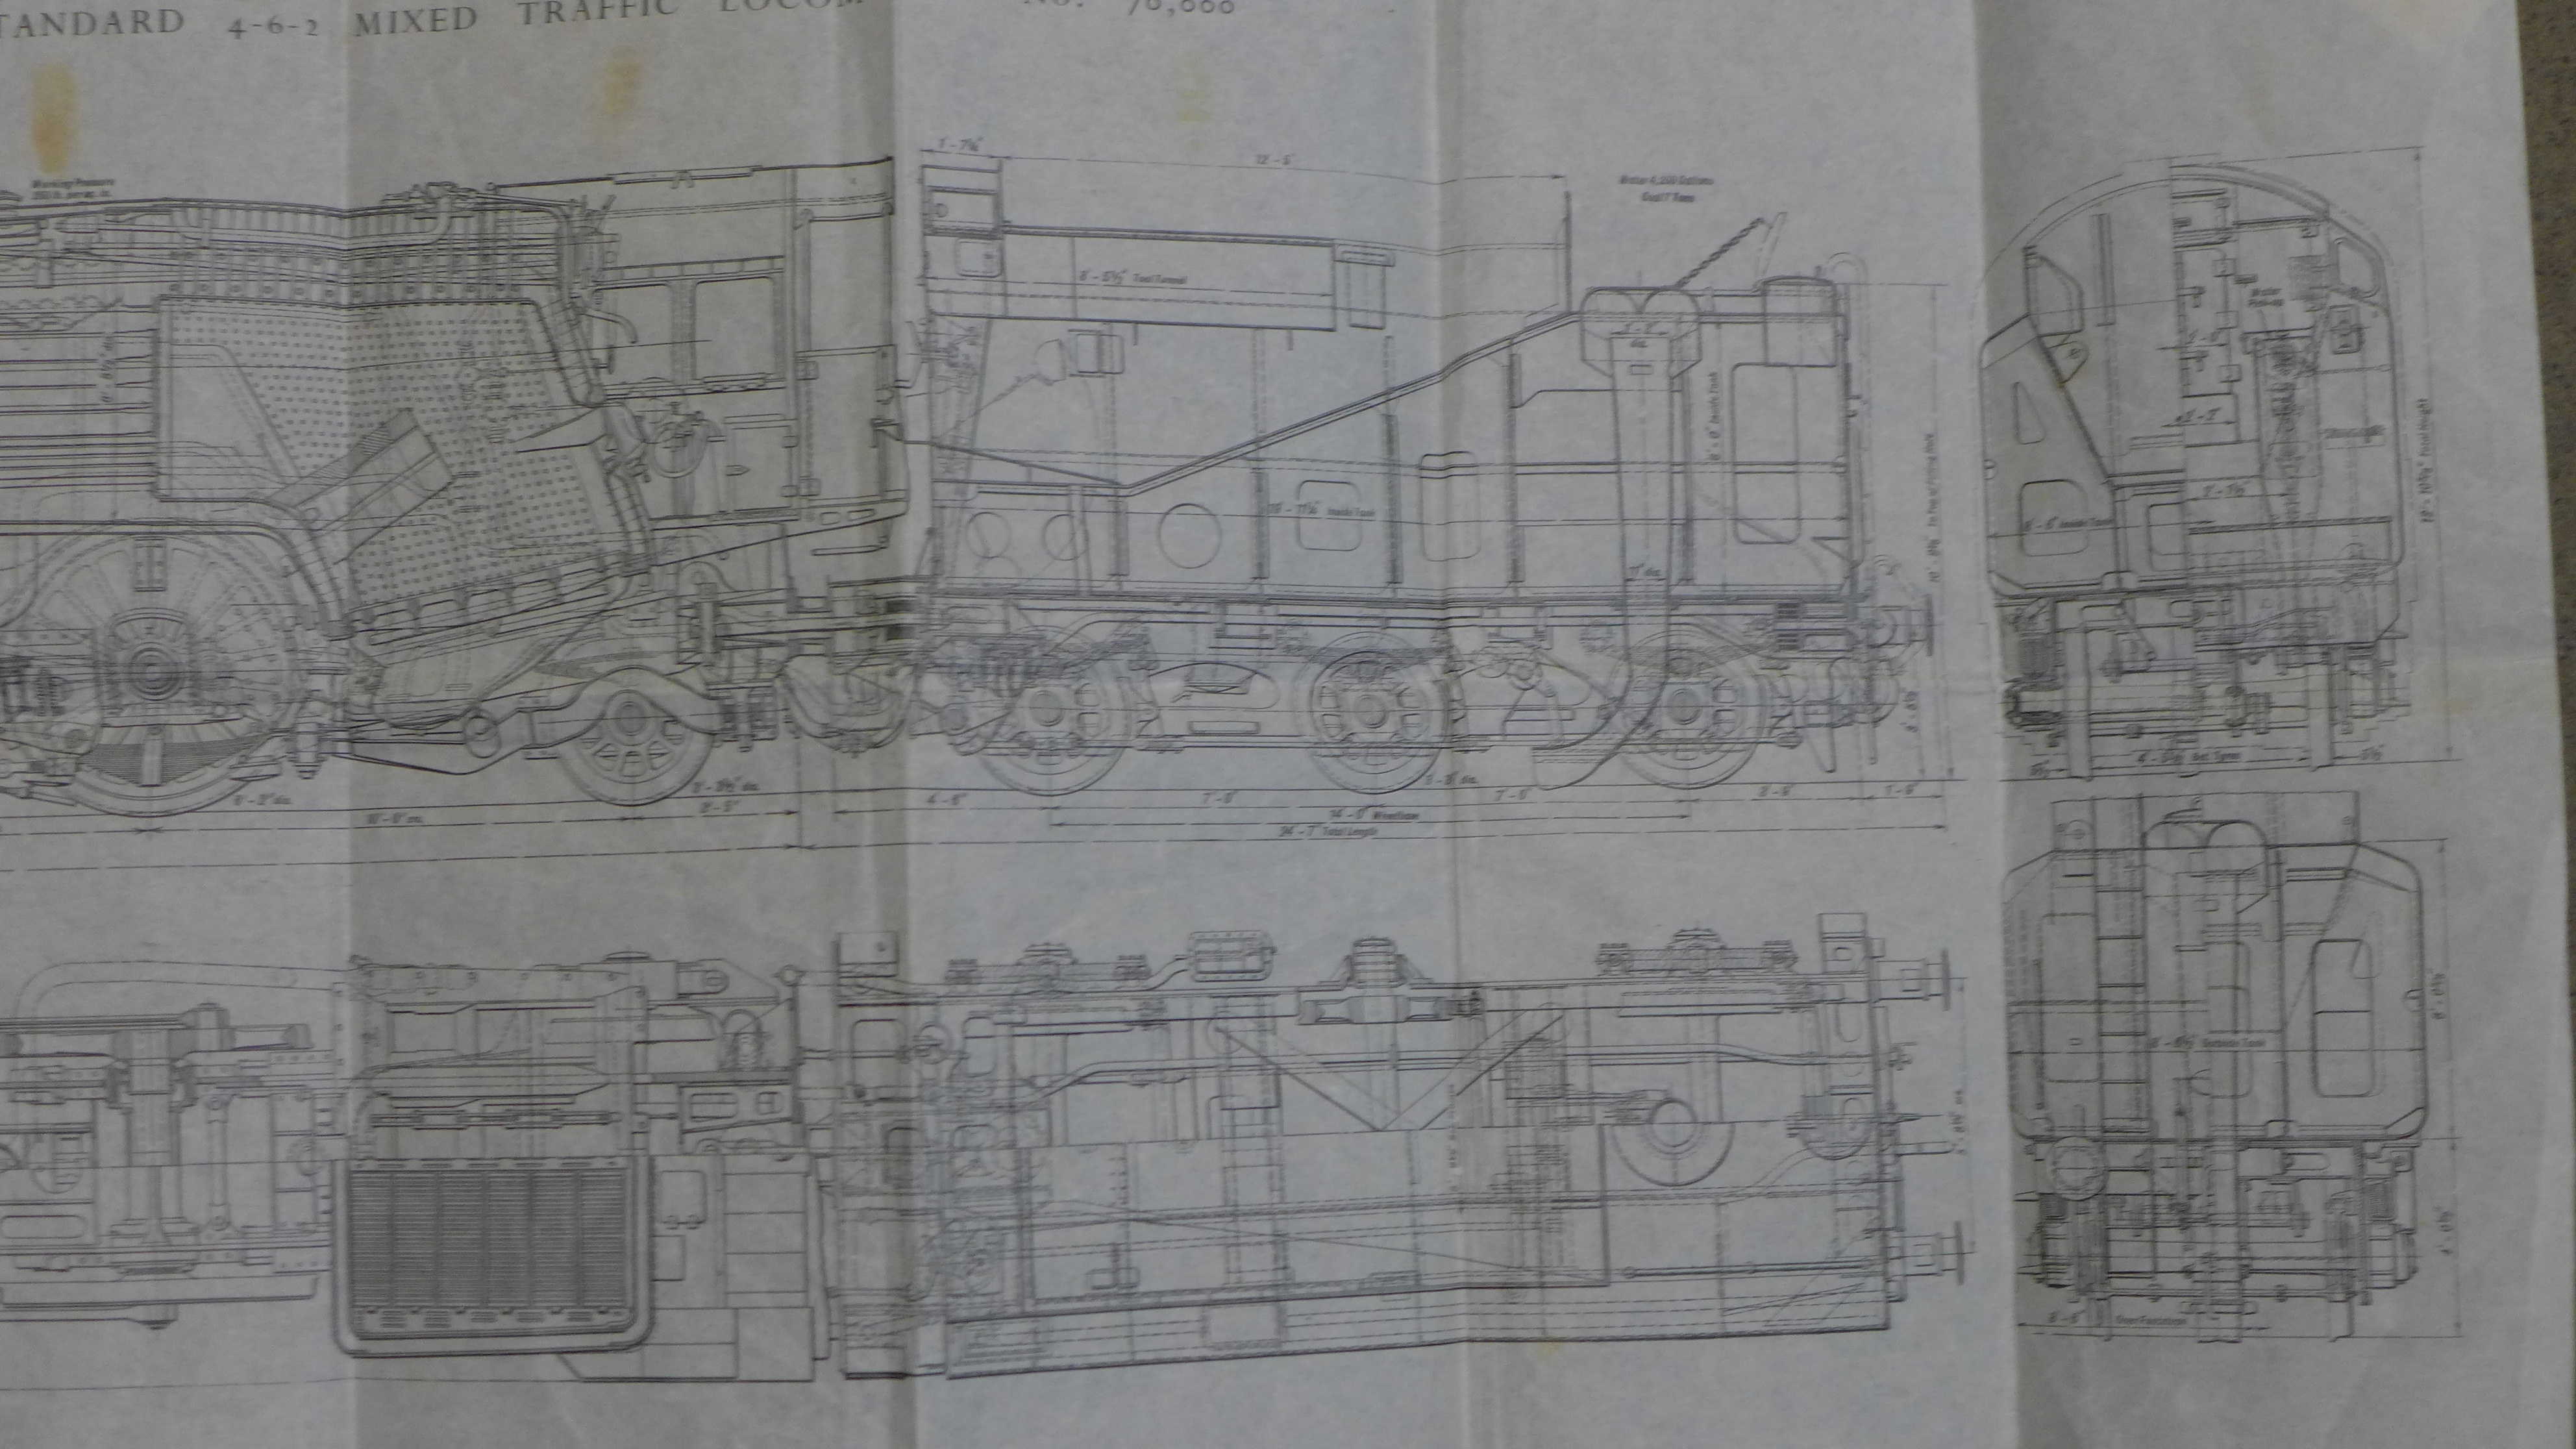 A diagram, Standard 4-6-2 Mixed Traffic Locomotive, No. - Image 3 of 3